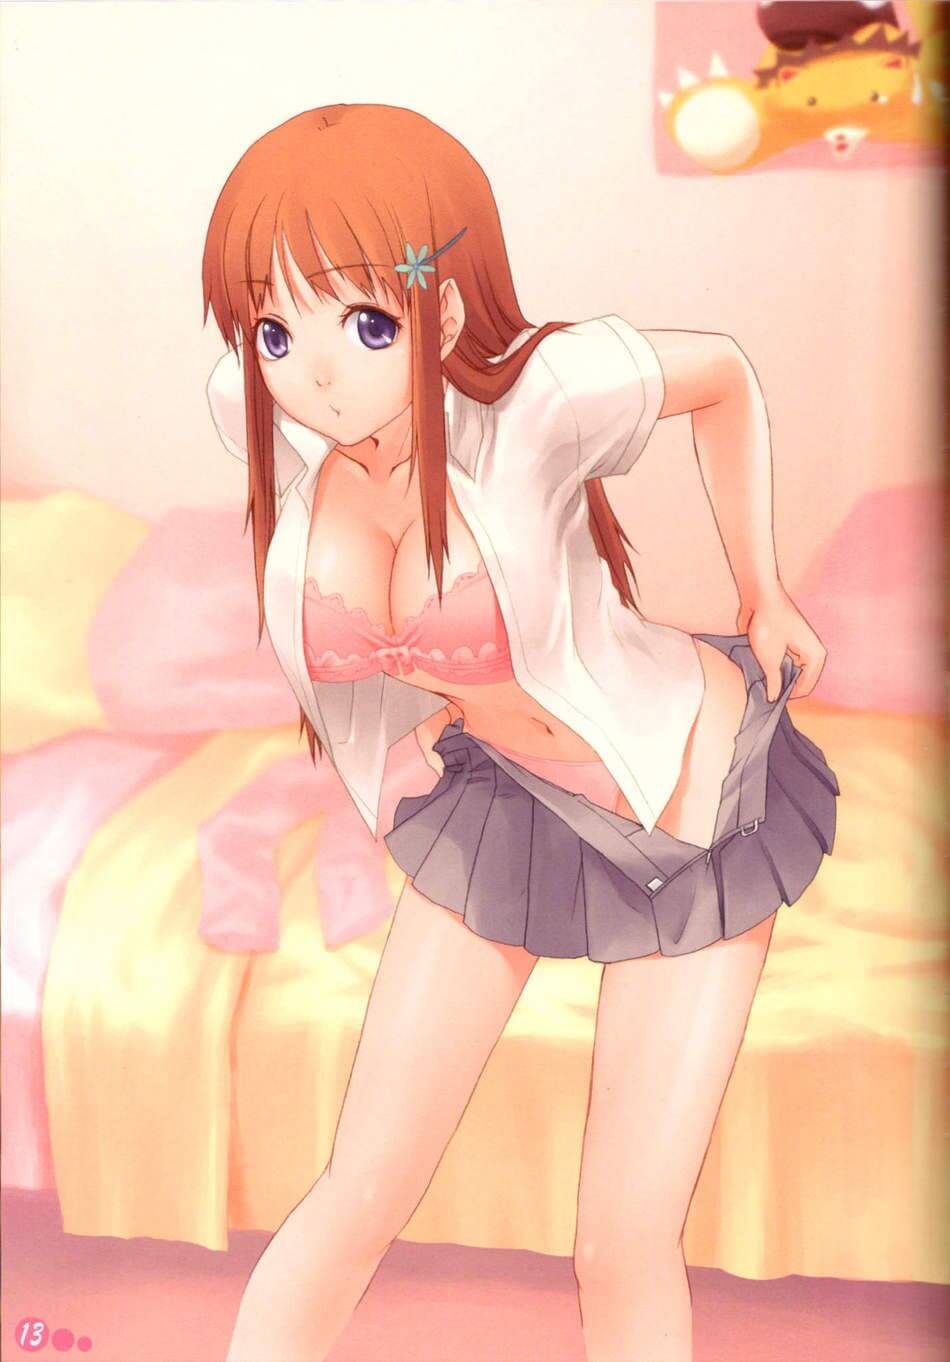 51 Sexy Orihime Inoue Boobs Pictures Are Windows Into Paradise | Best Of Comic Books